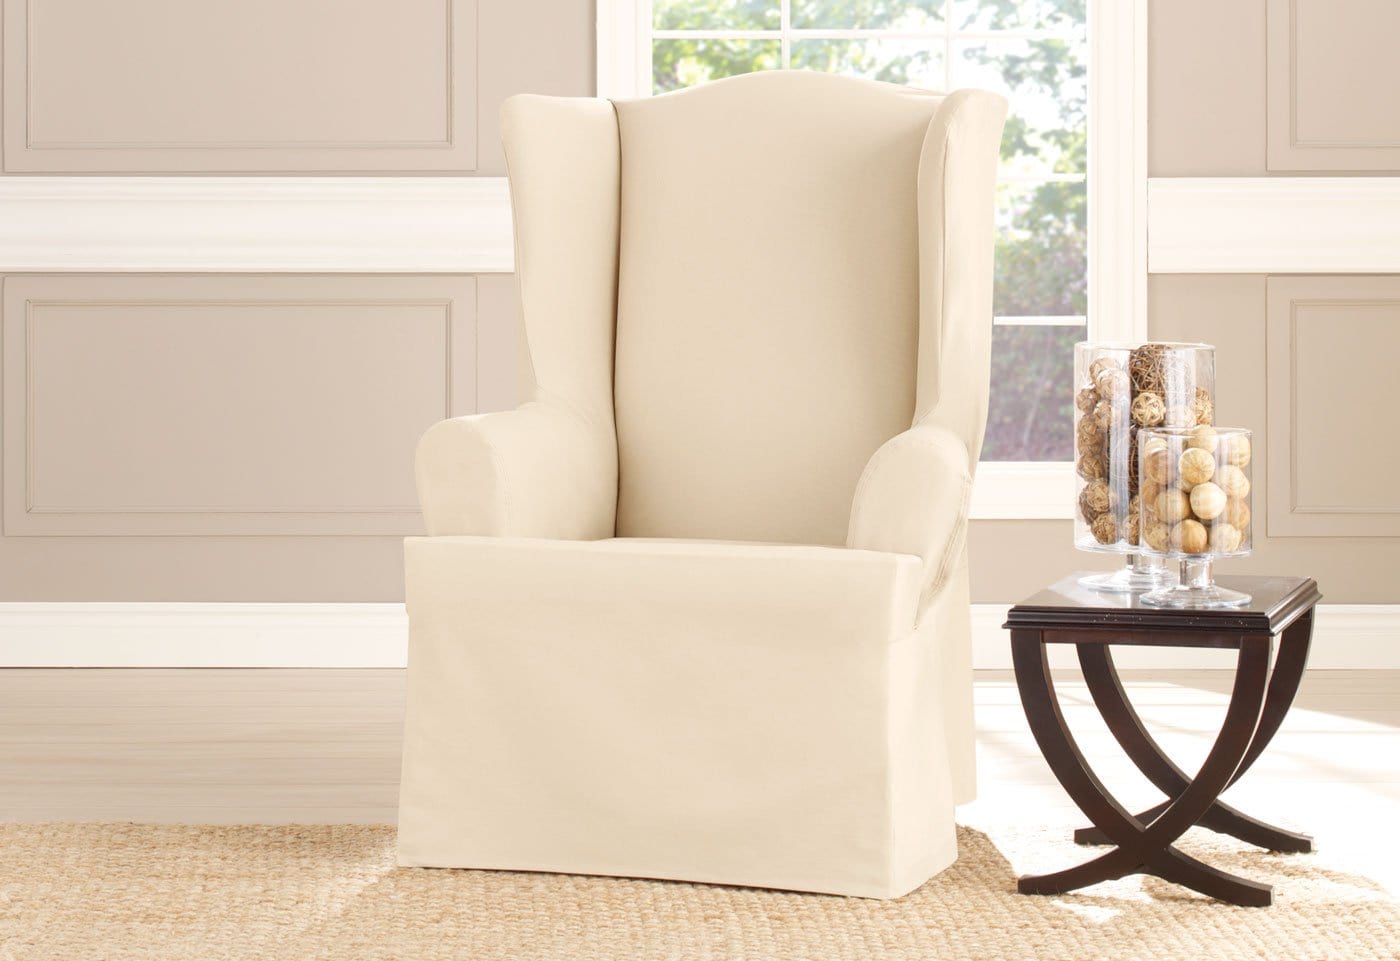 Sure Fit Cotton Duck Wing Chair Slipcover in Natural (As Is Item